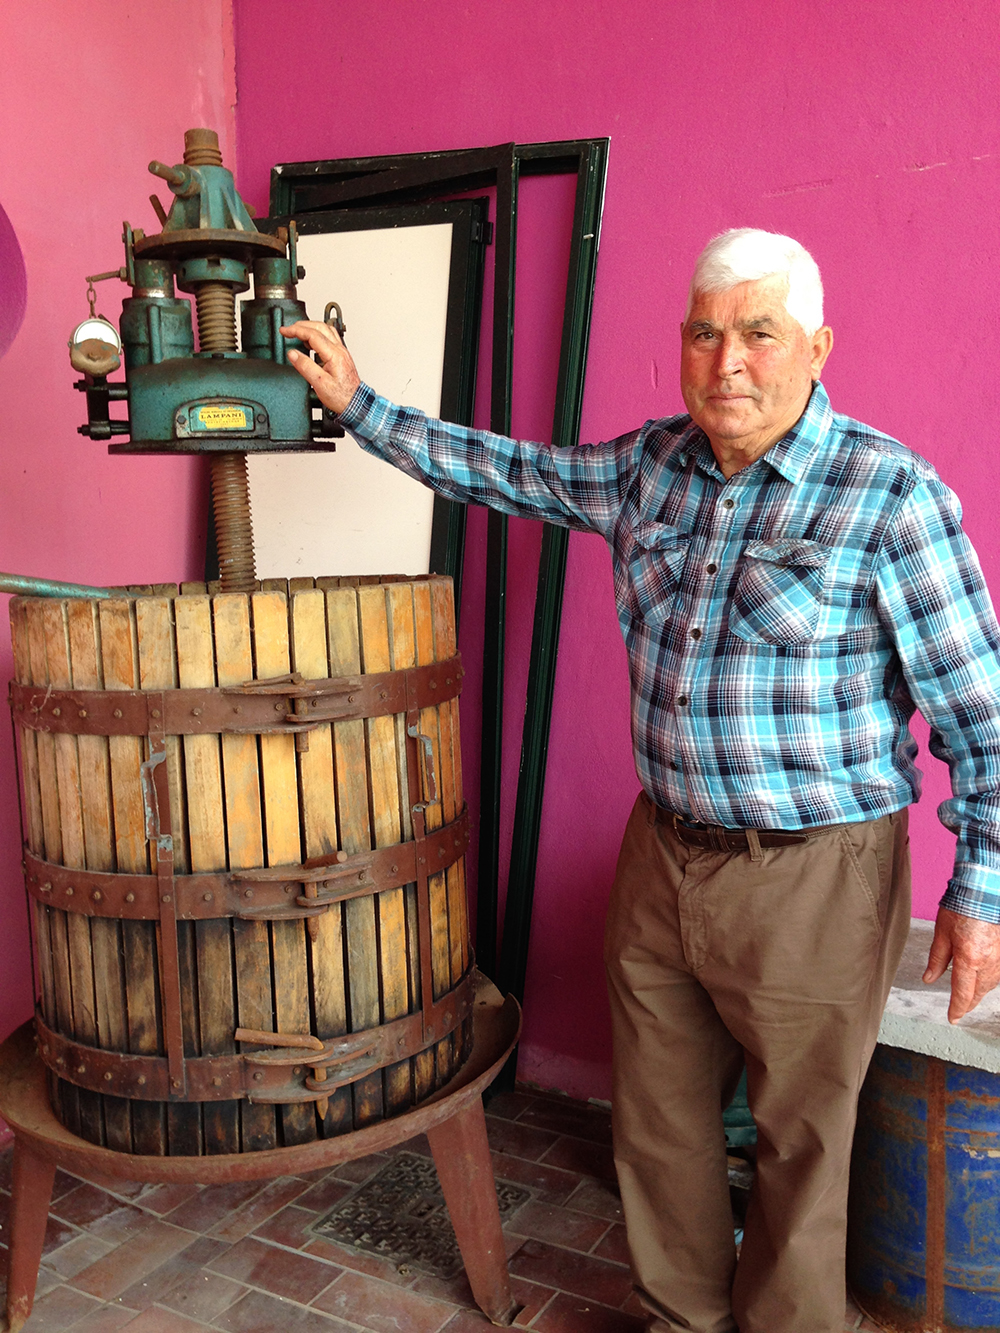 Anibale and his wine press in Casa di Baal, Anibale is a white haired wine producer